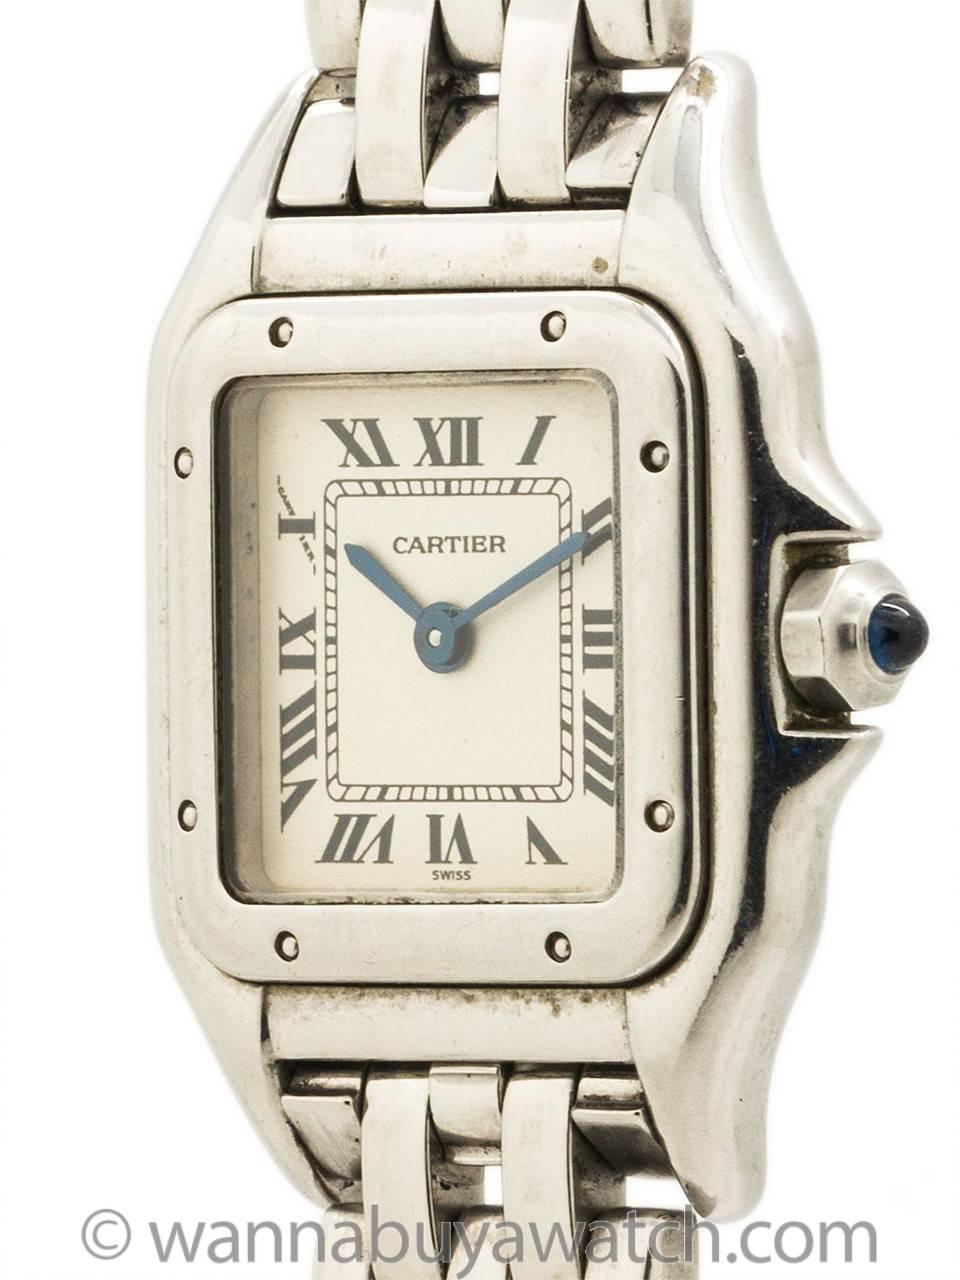 Cartier Lady’s stainless steel Panther circa 1990’s. Very nice condition preowned example. Battery powered quartz movement. Panther bracelet with butterfly deployment clasp. The panther was a much sought after classic model for close to two decades